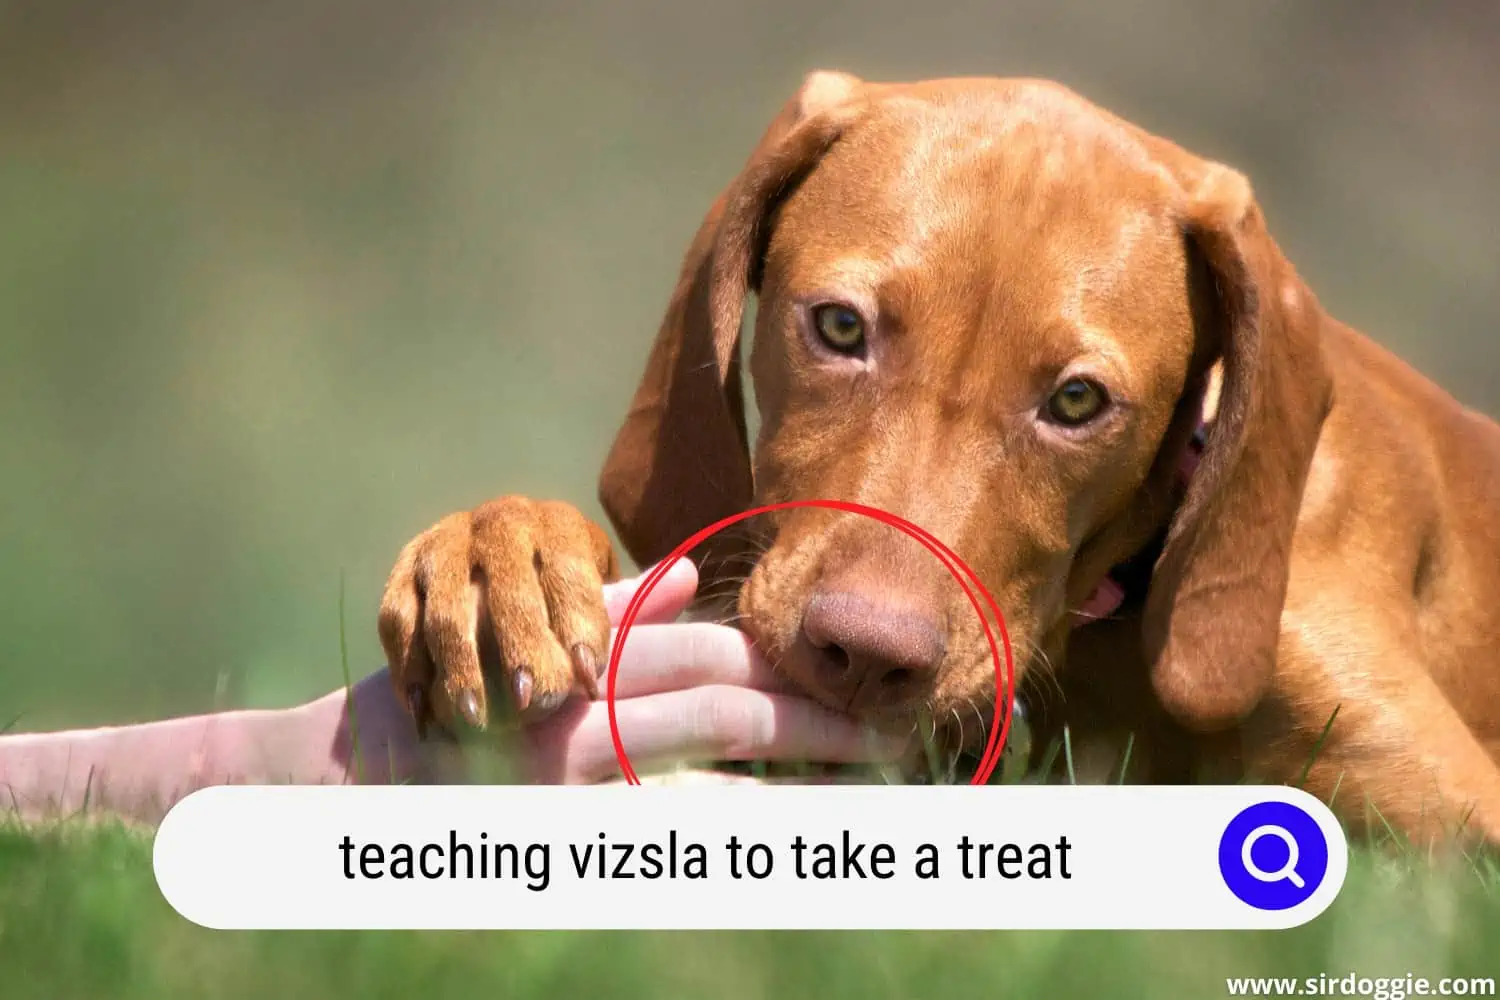 A photo of a pet owner's hand giving treats to Vizsla